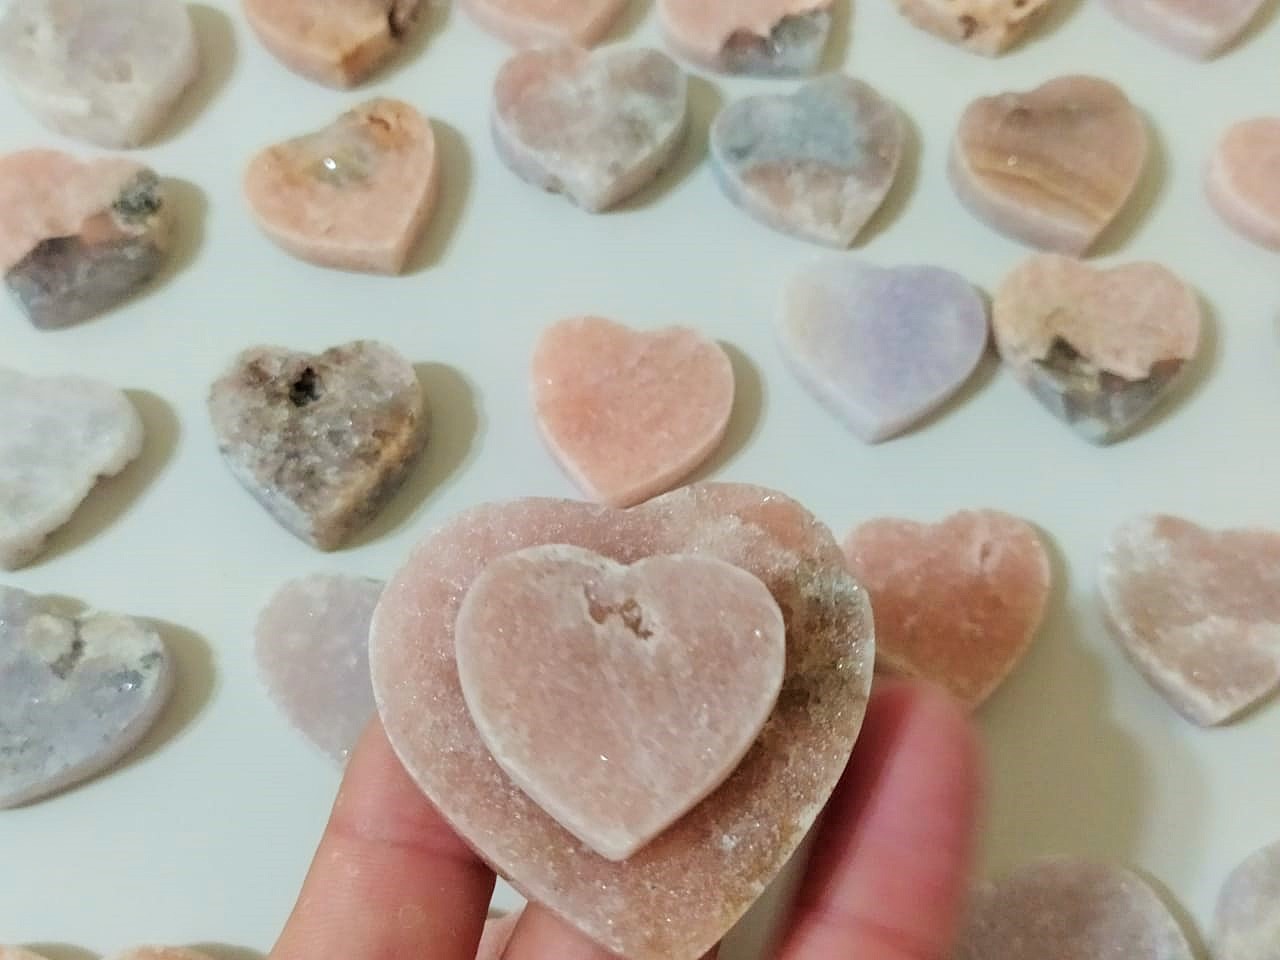 Stones from Uruguay - PINK AMETHYST CLUSTER HEARTS - PINK AMETHYST HEARTS -  ROSE AMETHYST HEARTS